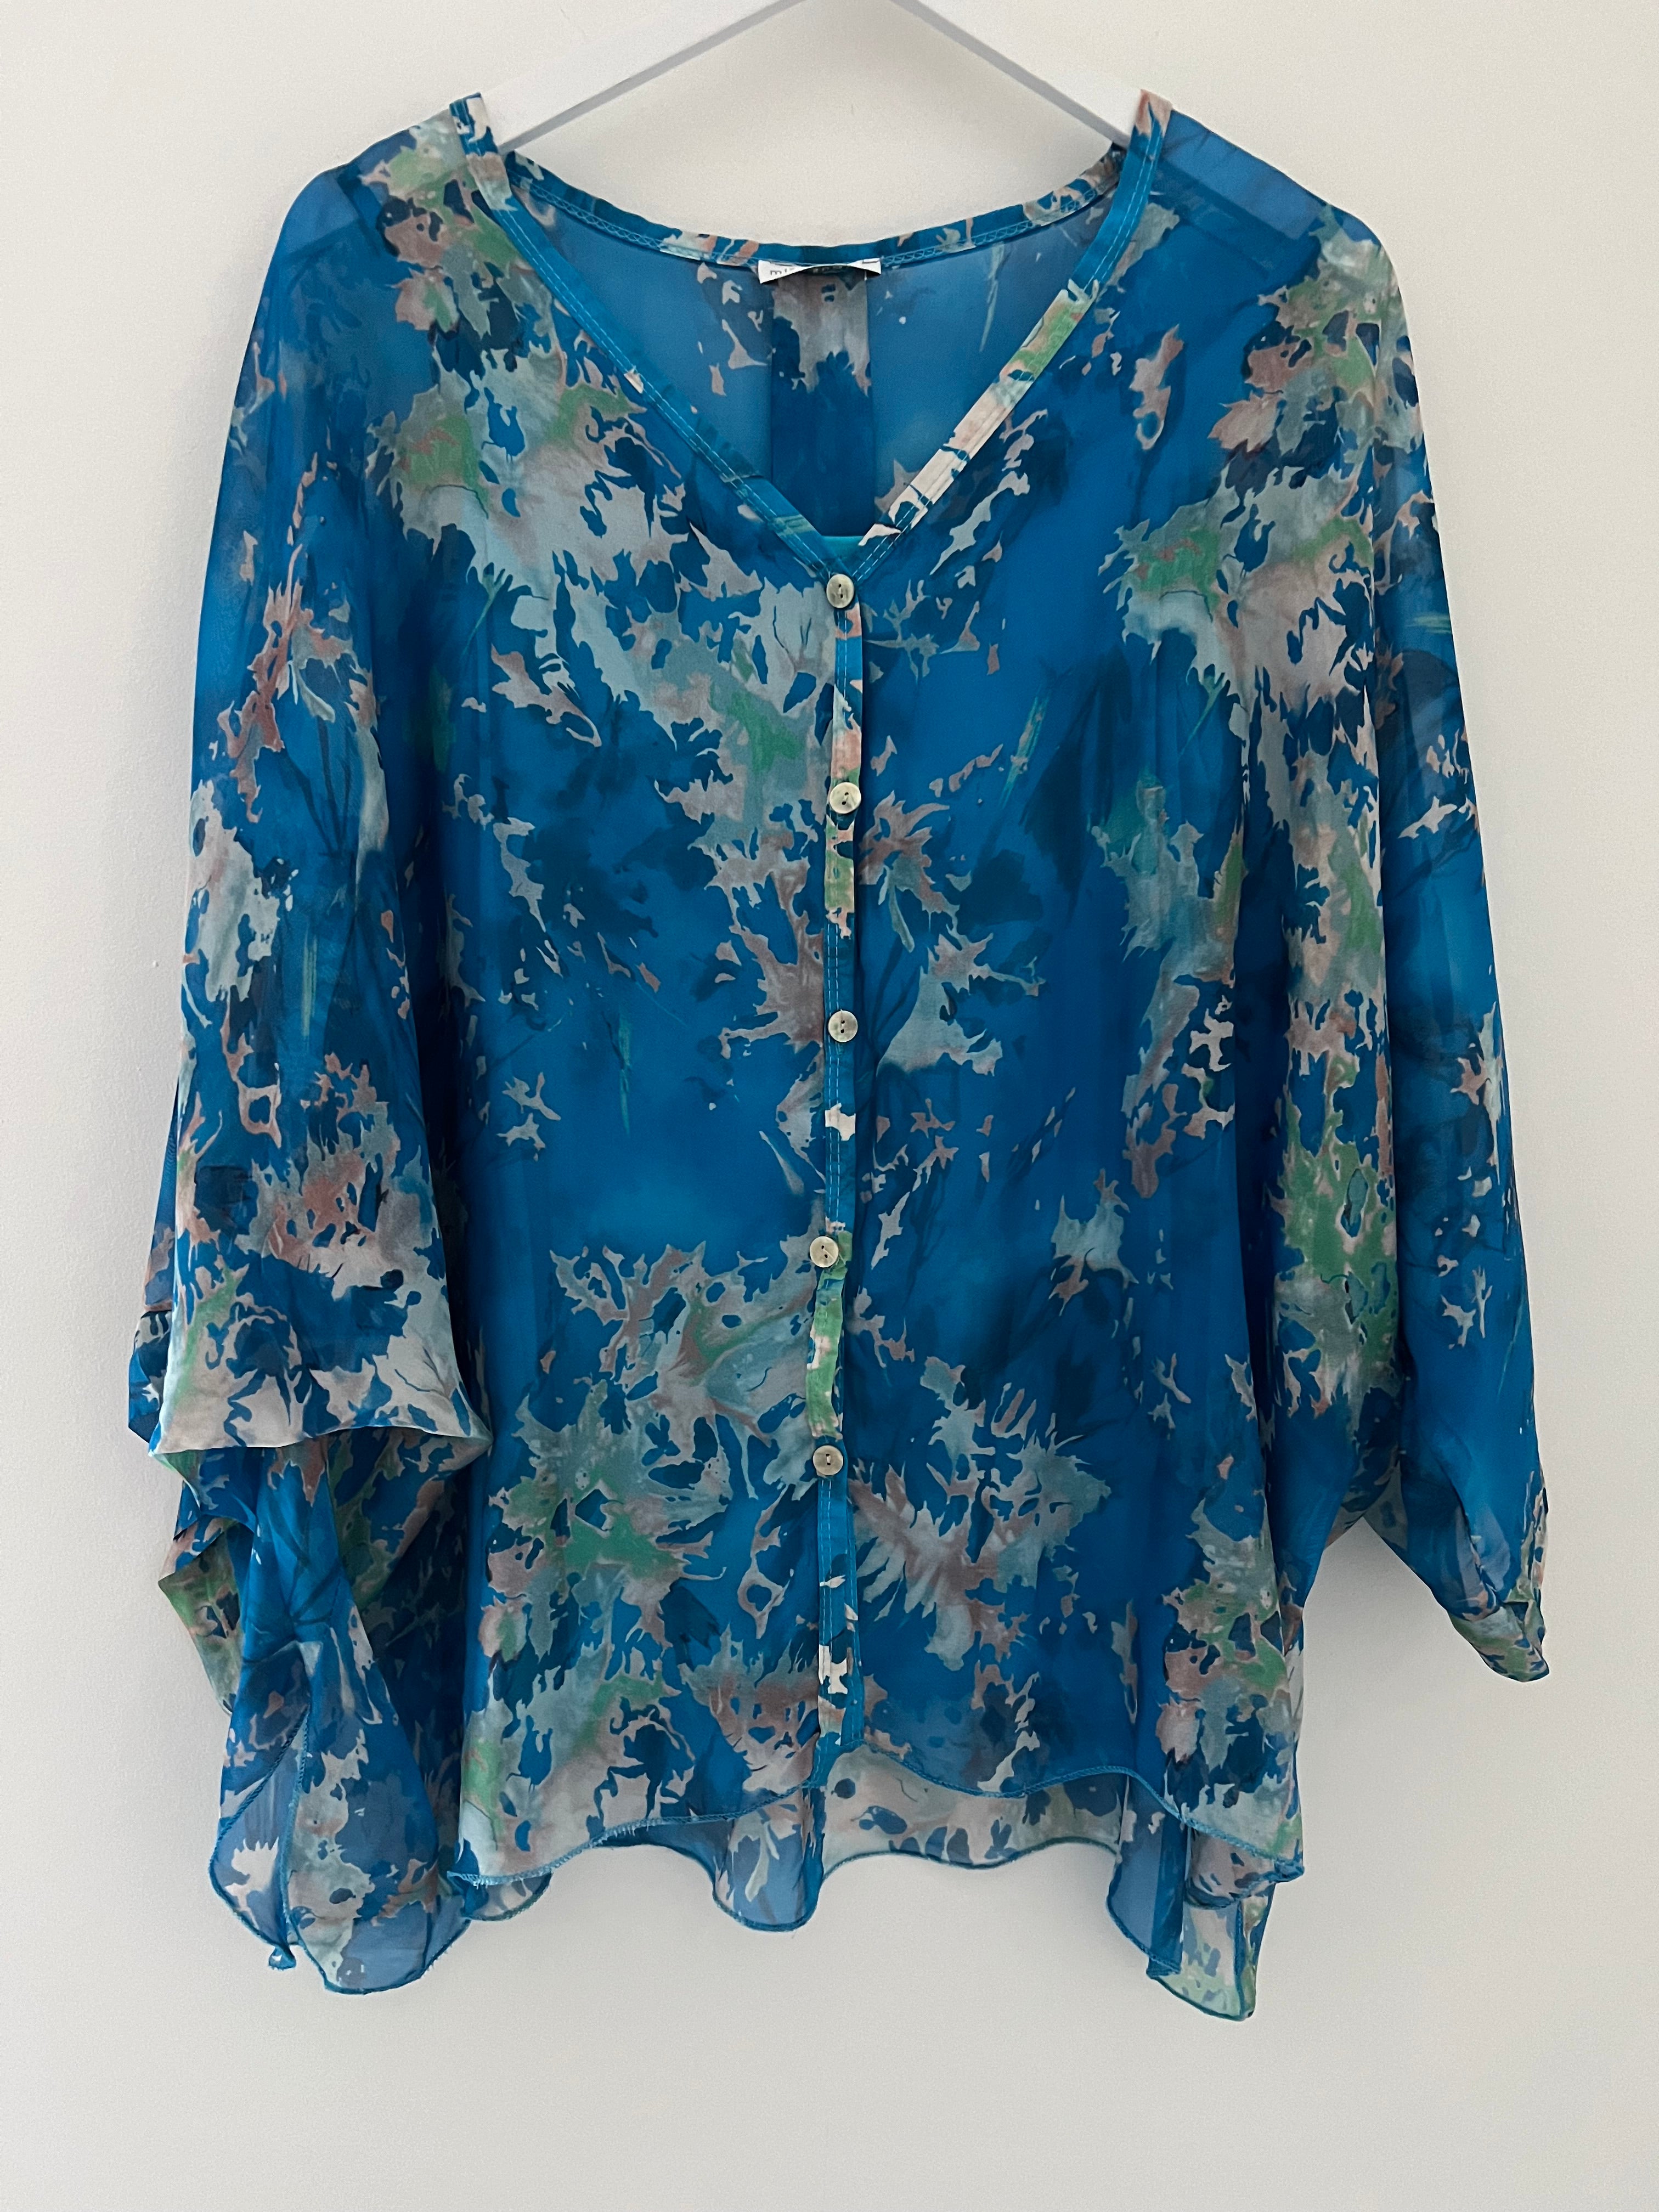 Silk Blouse & Cami in Shades of Aqua & Turquoise